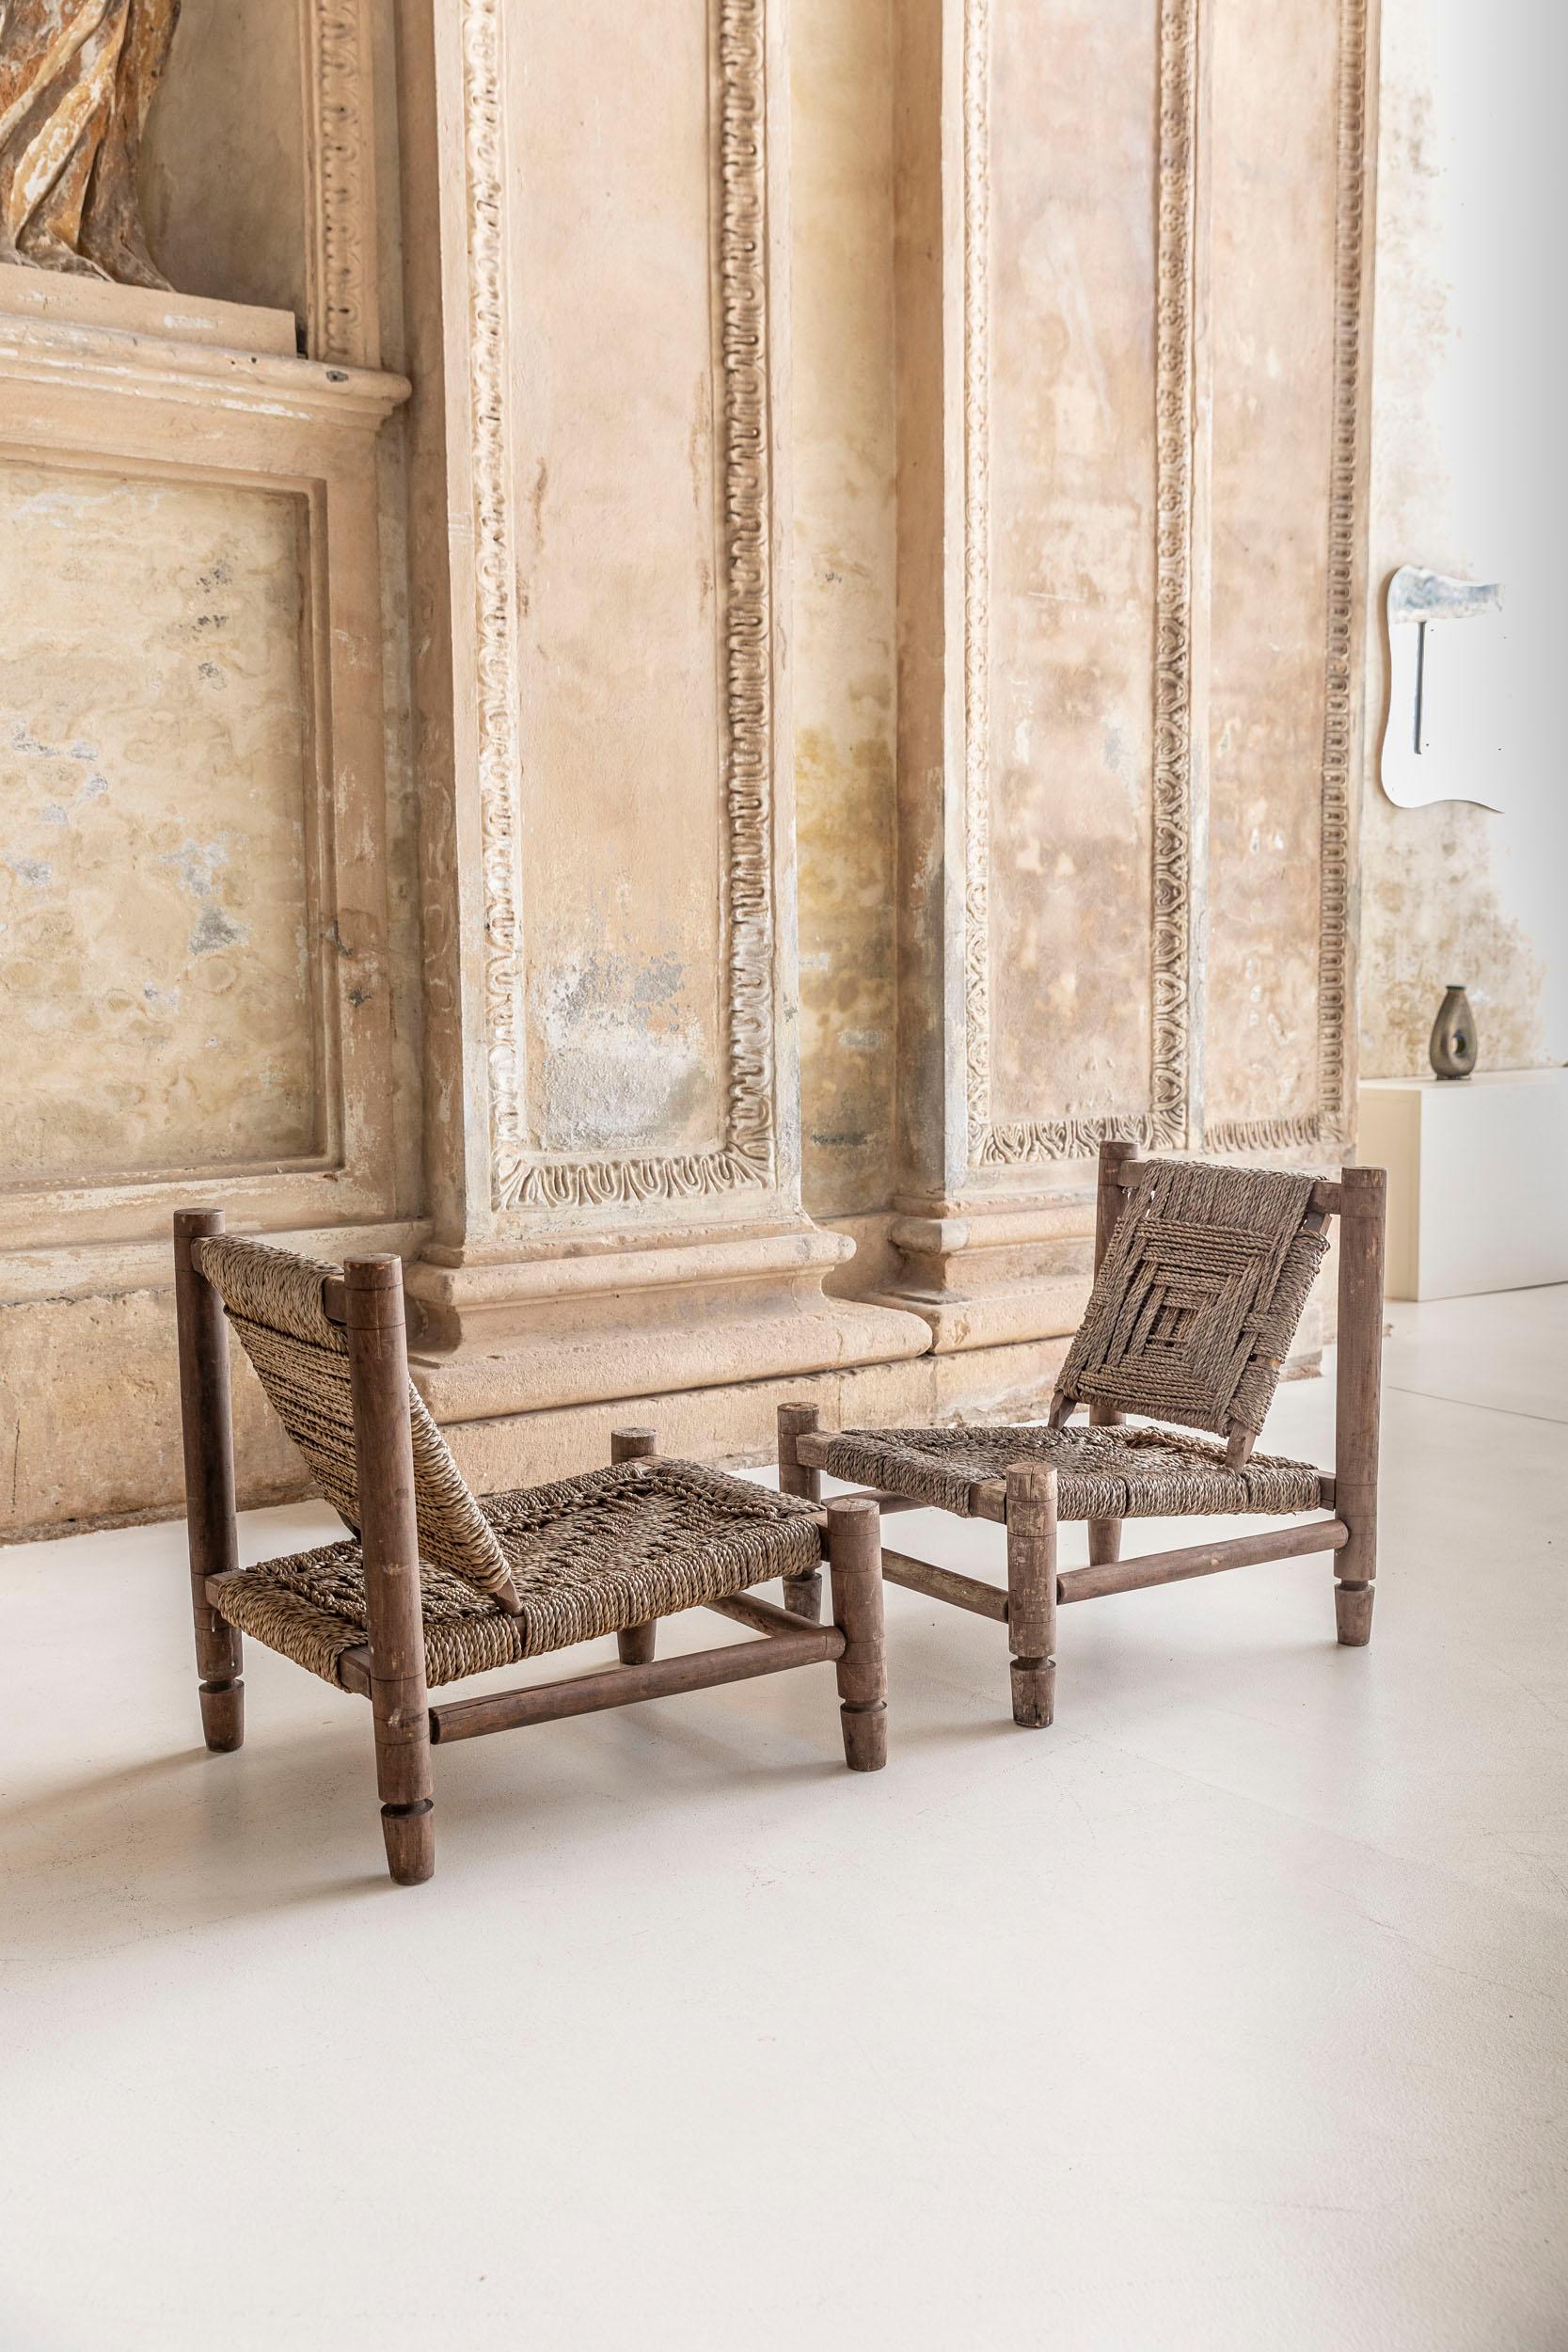 Rare set of six chairs attributed to Adrien Audox and Frida Minet.
The chairs are made of beechwood and wooden abaca rope seat and back.
The legs present typical Audoux Minet carved wood.
The chairs are perfect in the garden but also indoor.